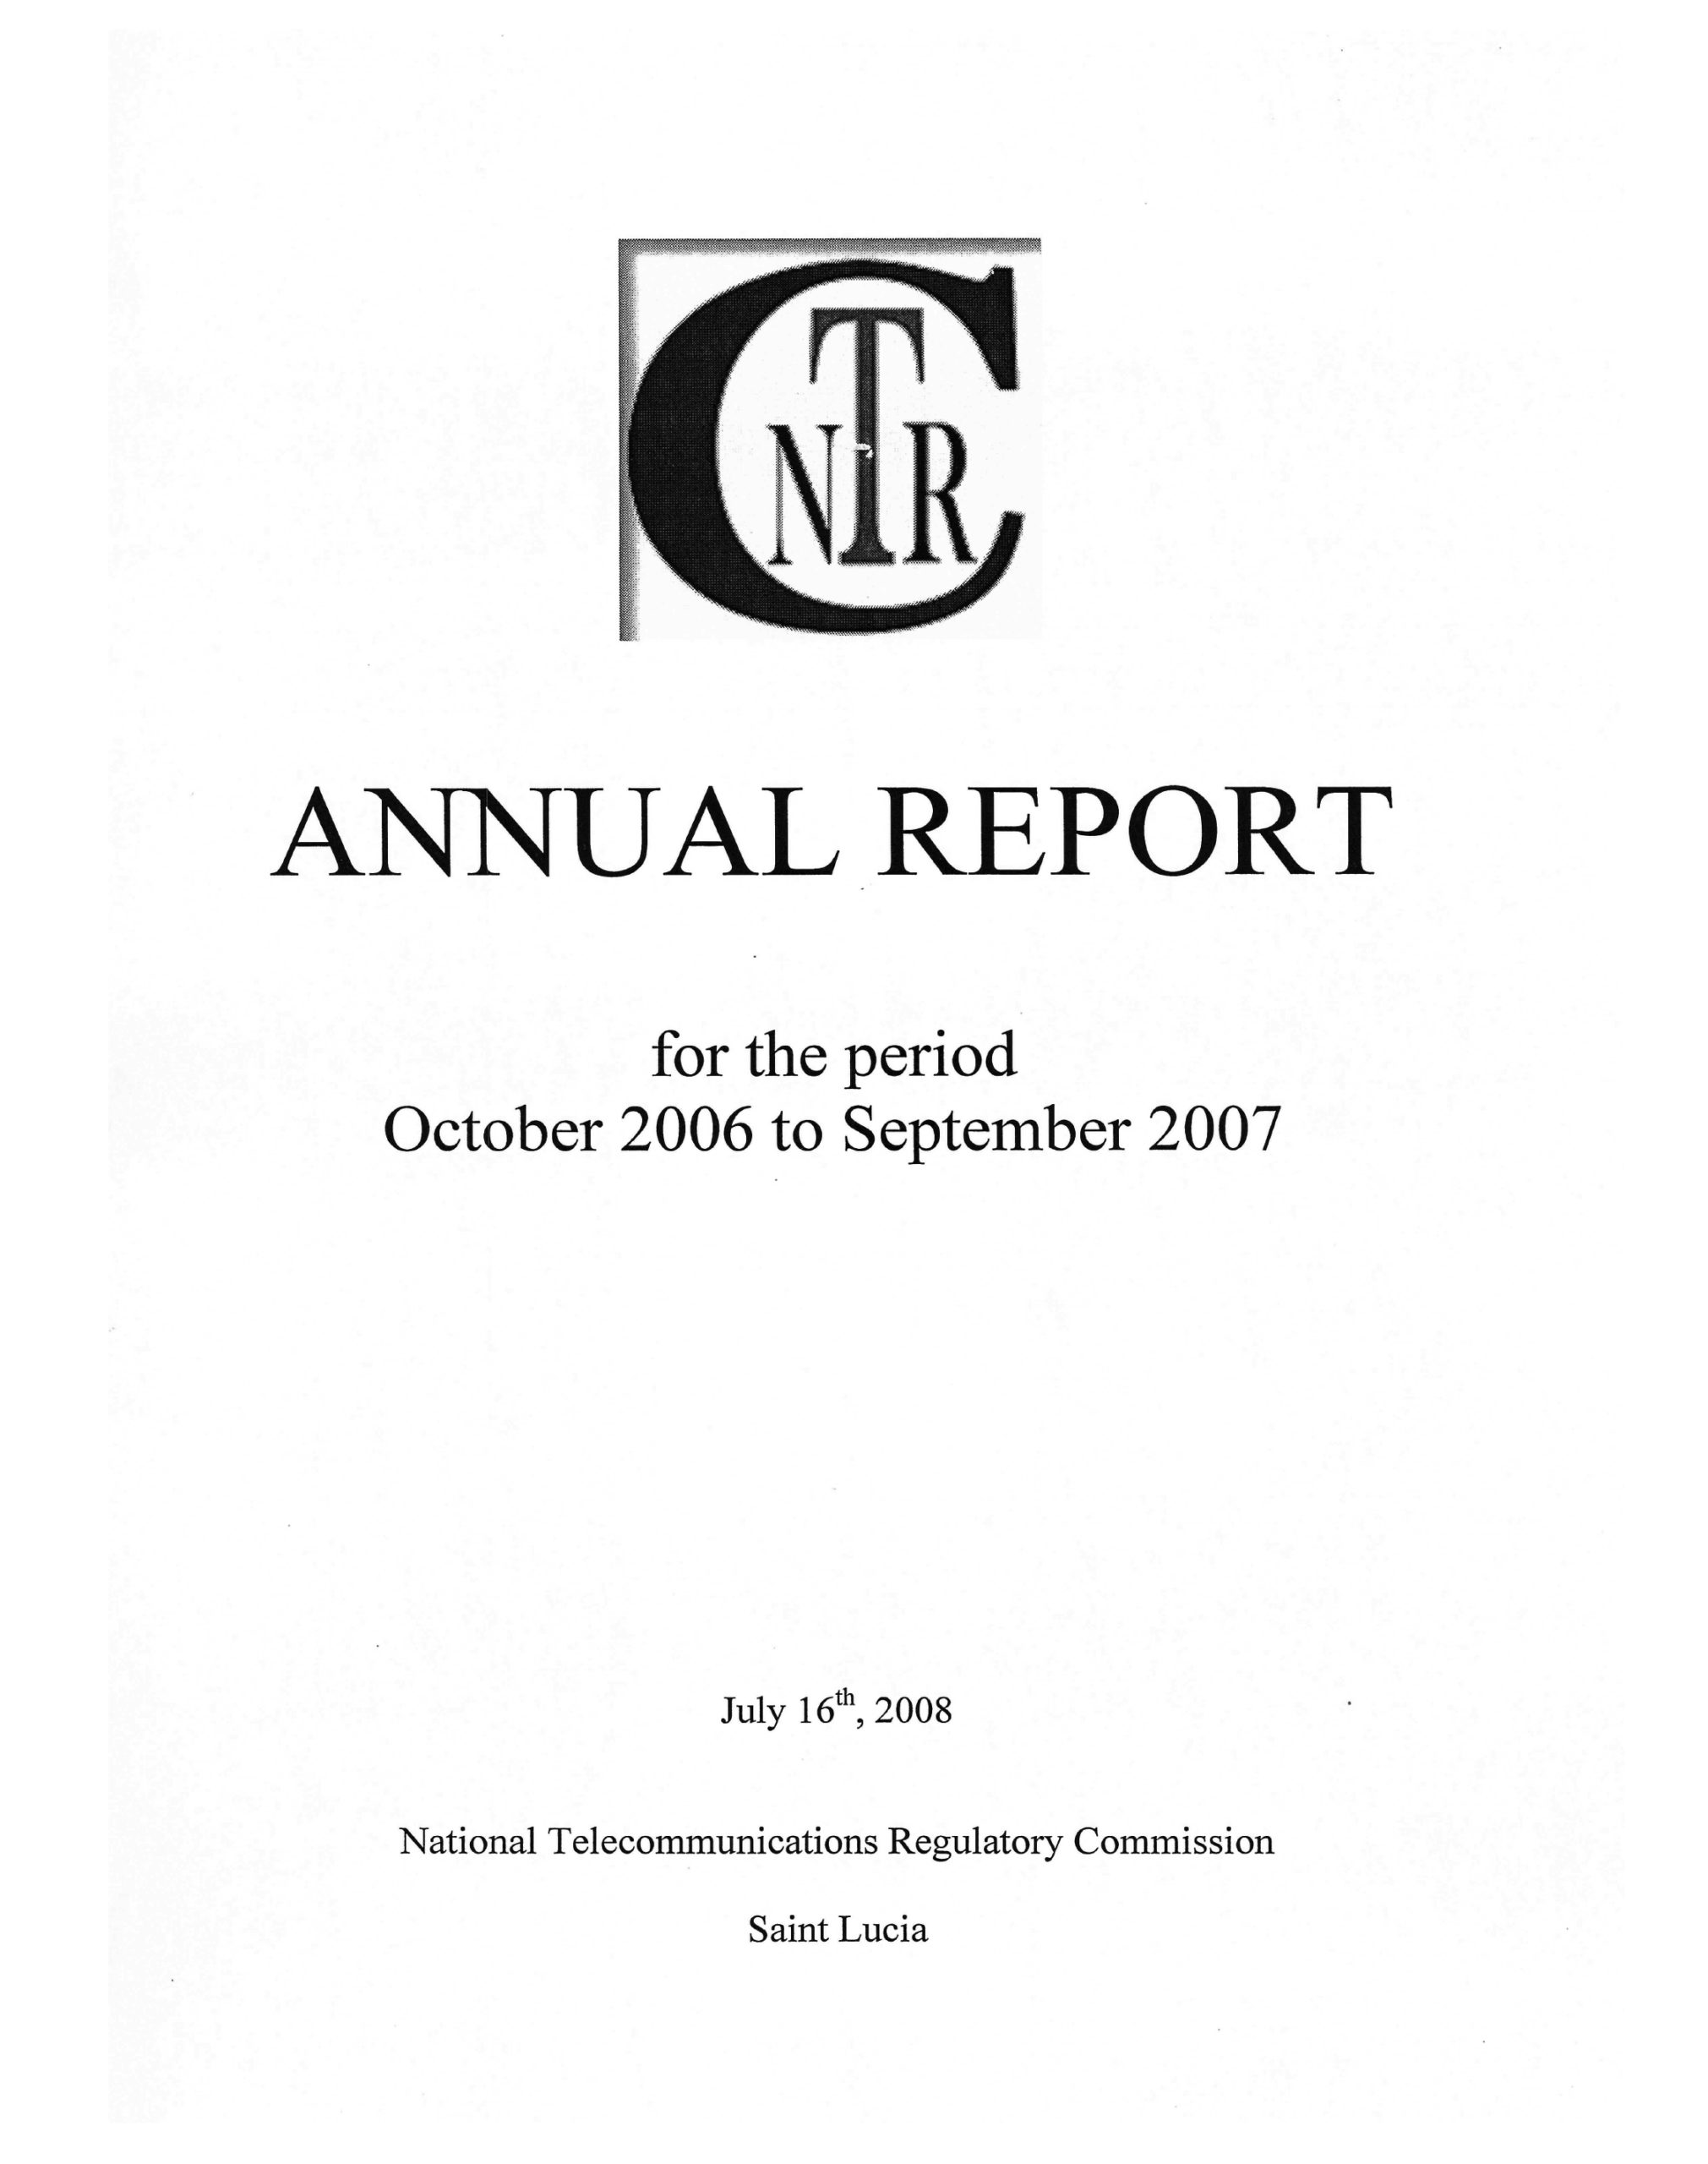 Annual Report Period October 2006 to September 2007